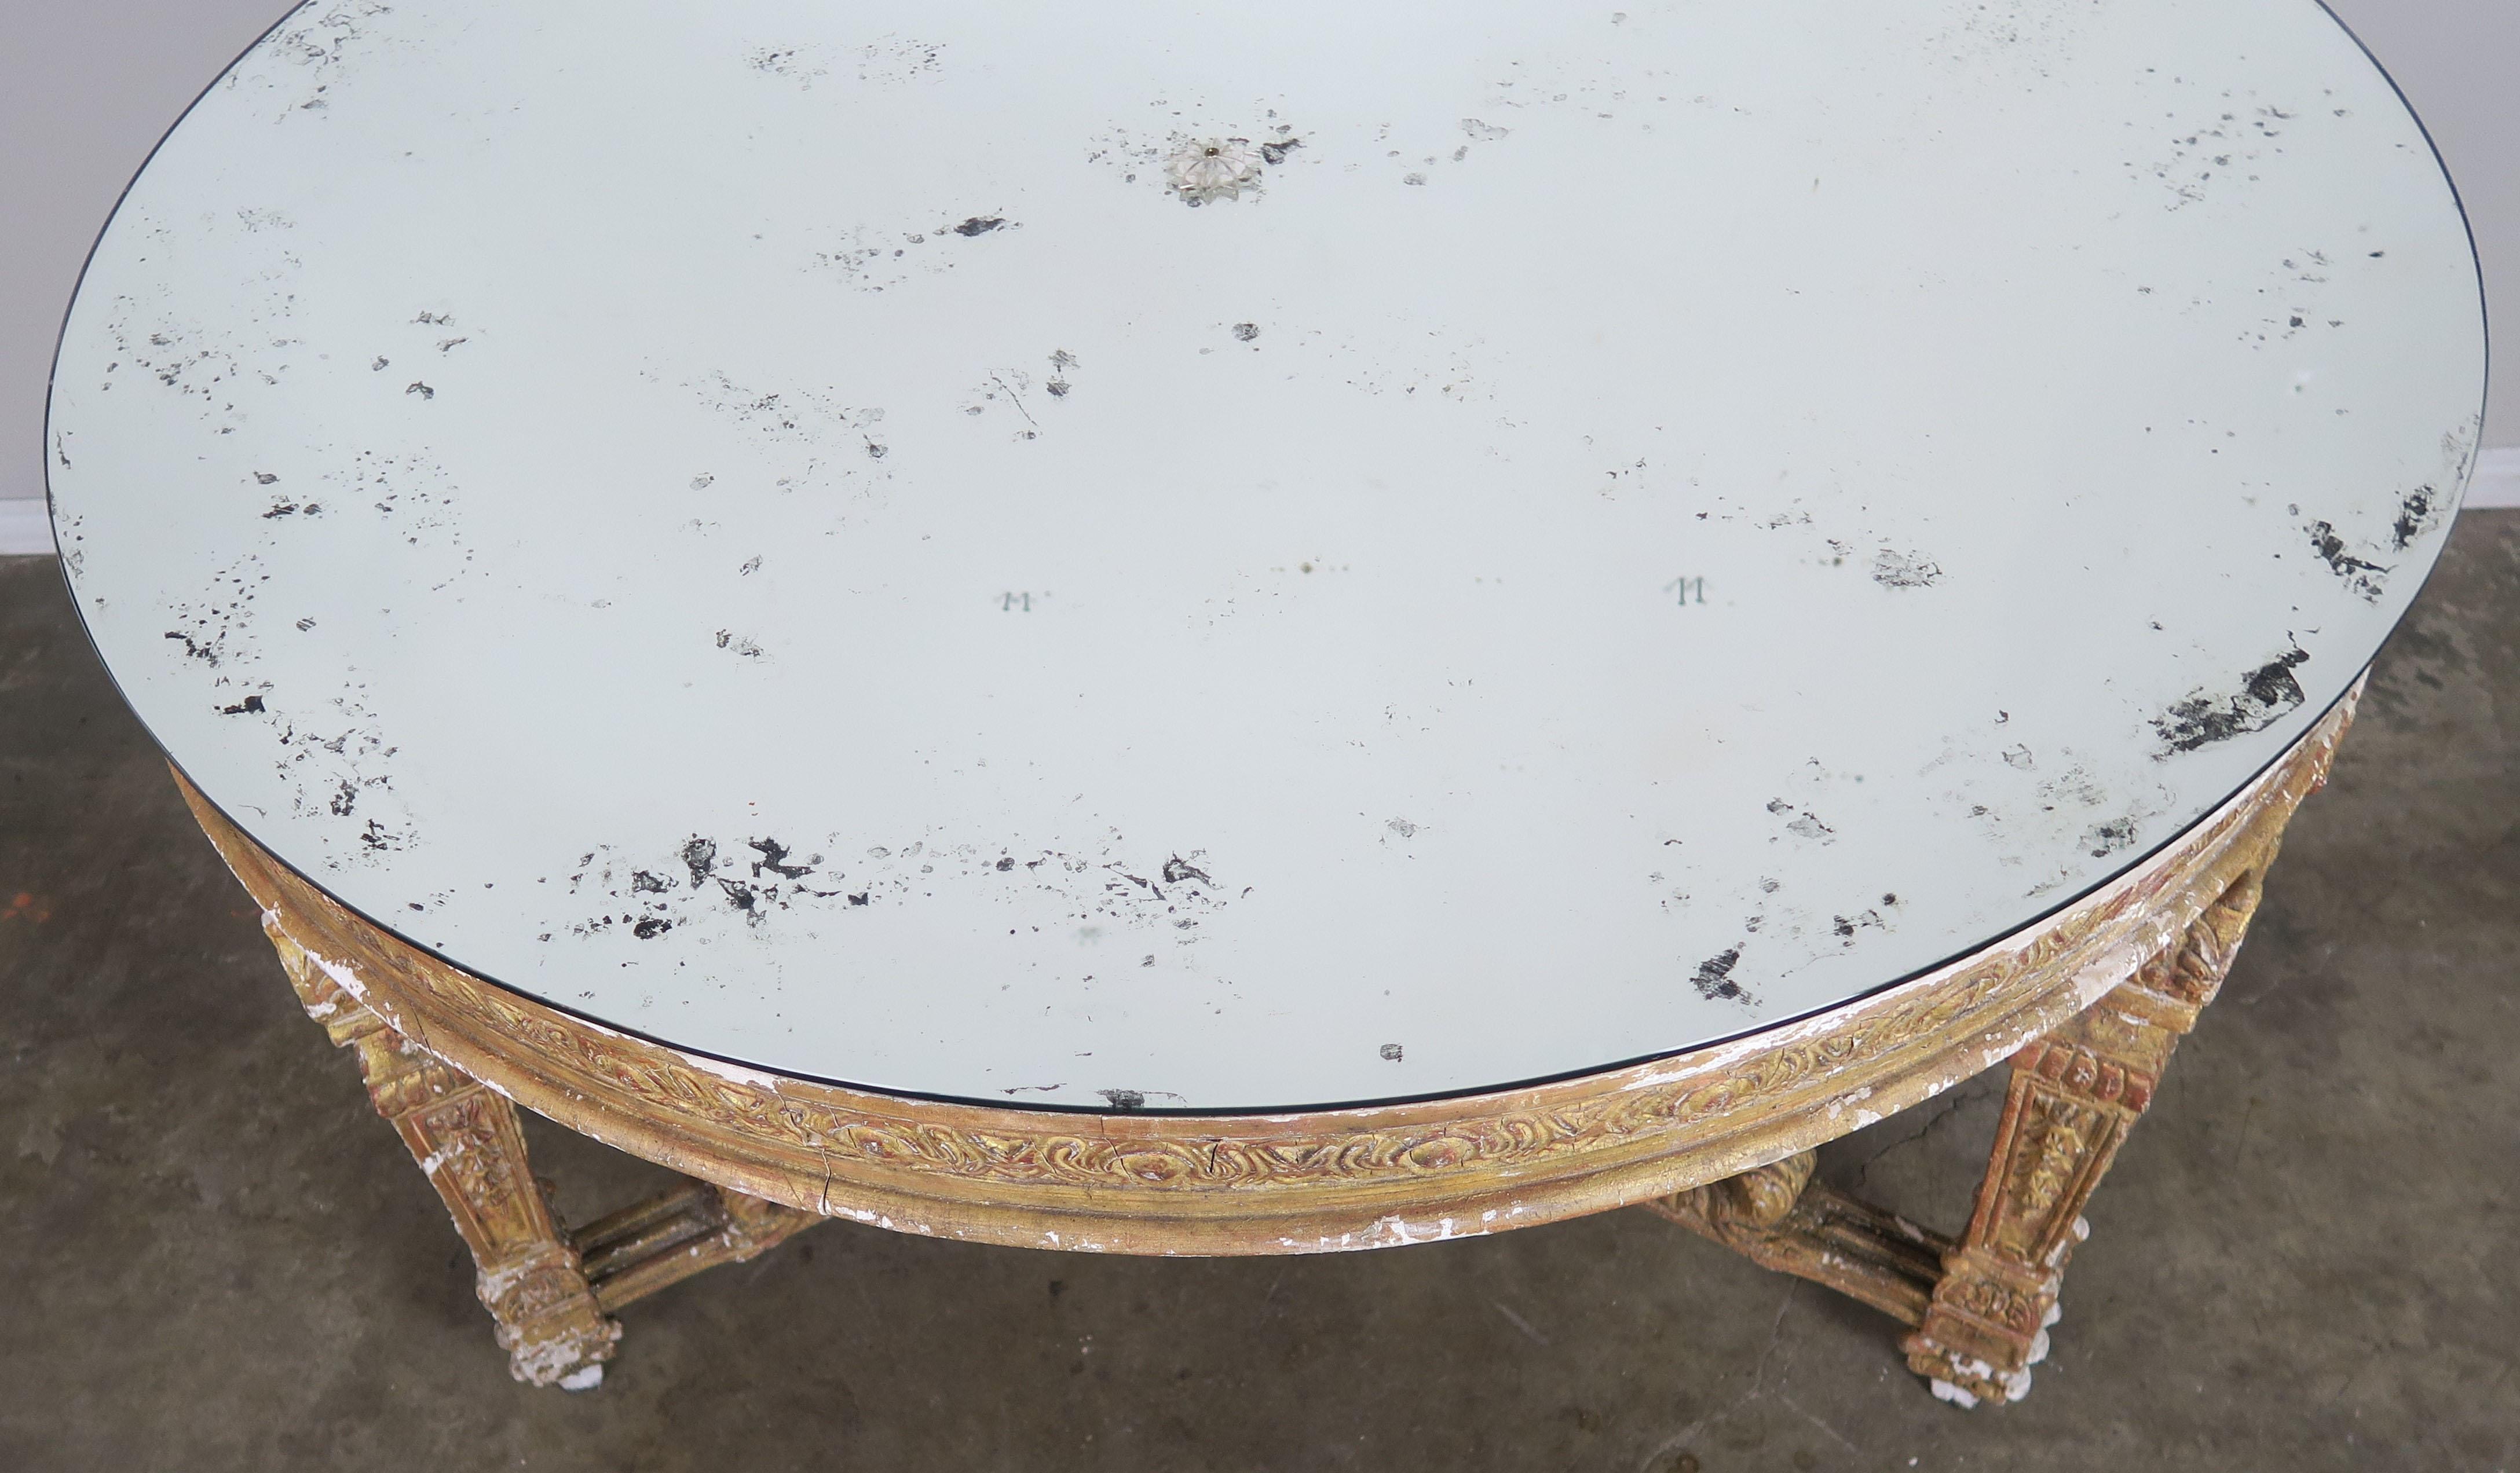 Italian Neoclassical Style Giltwood Center Table with Mirrored Top 2